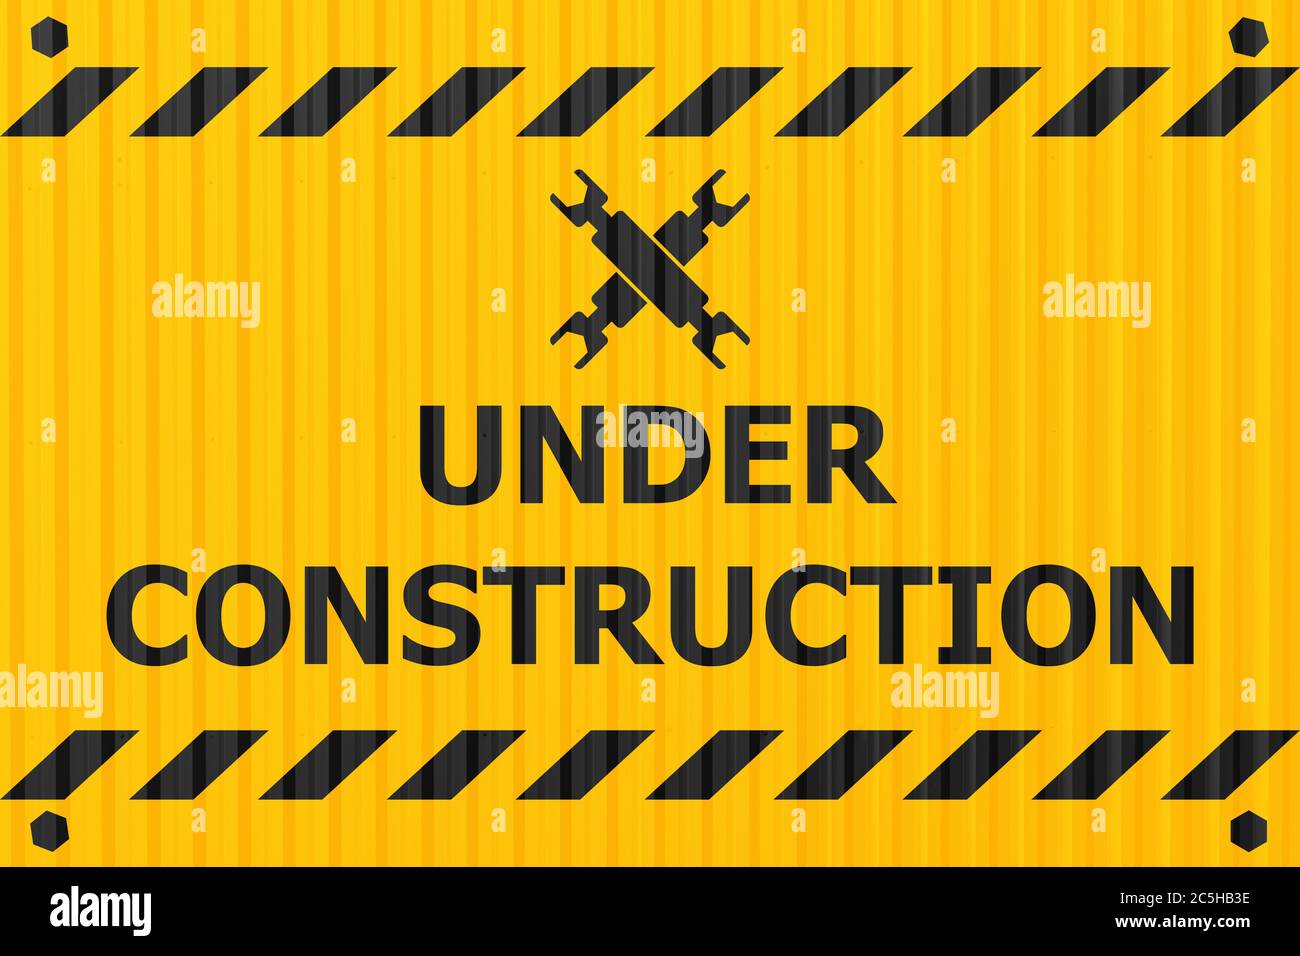 underconstruction banner logo label for construction site or website down notify warning industry steel plate style design. Stock Photo